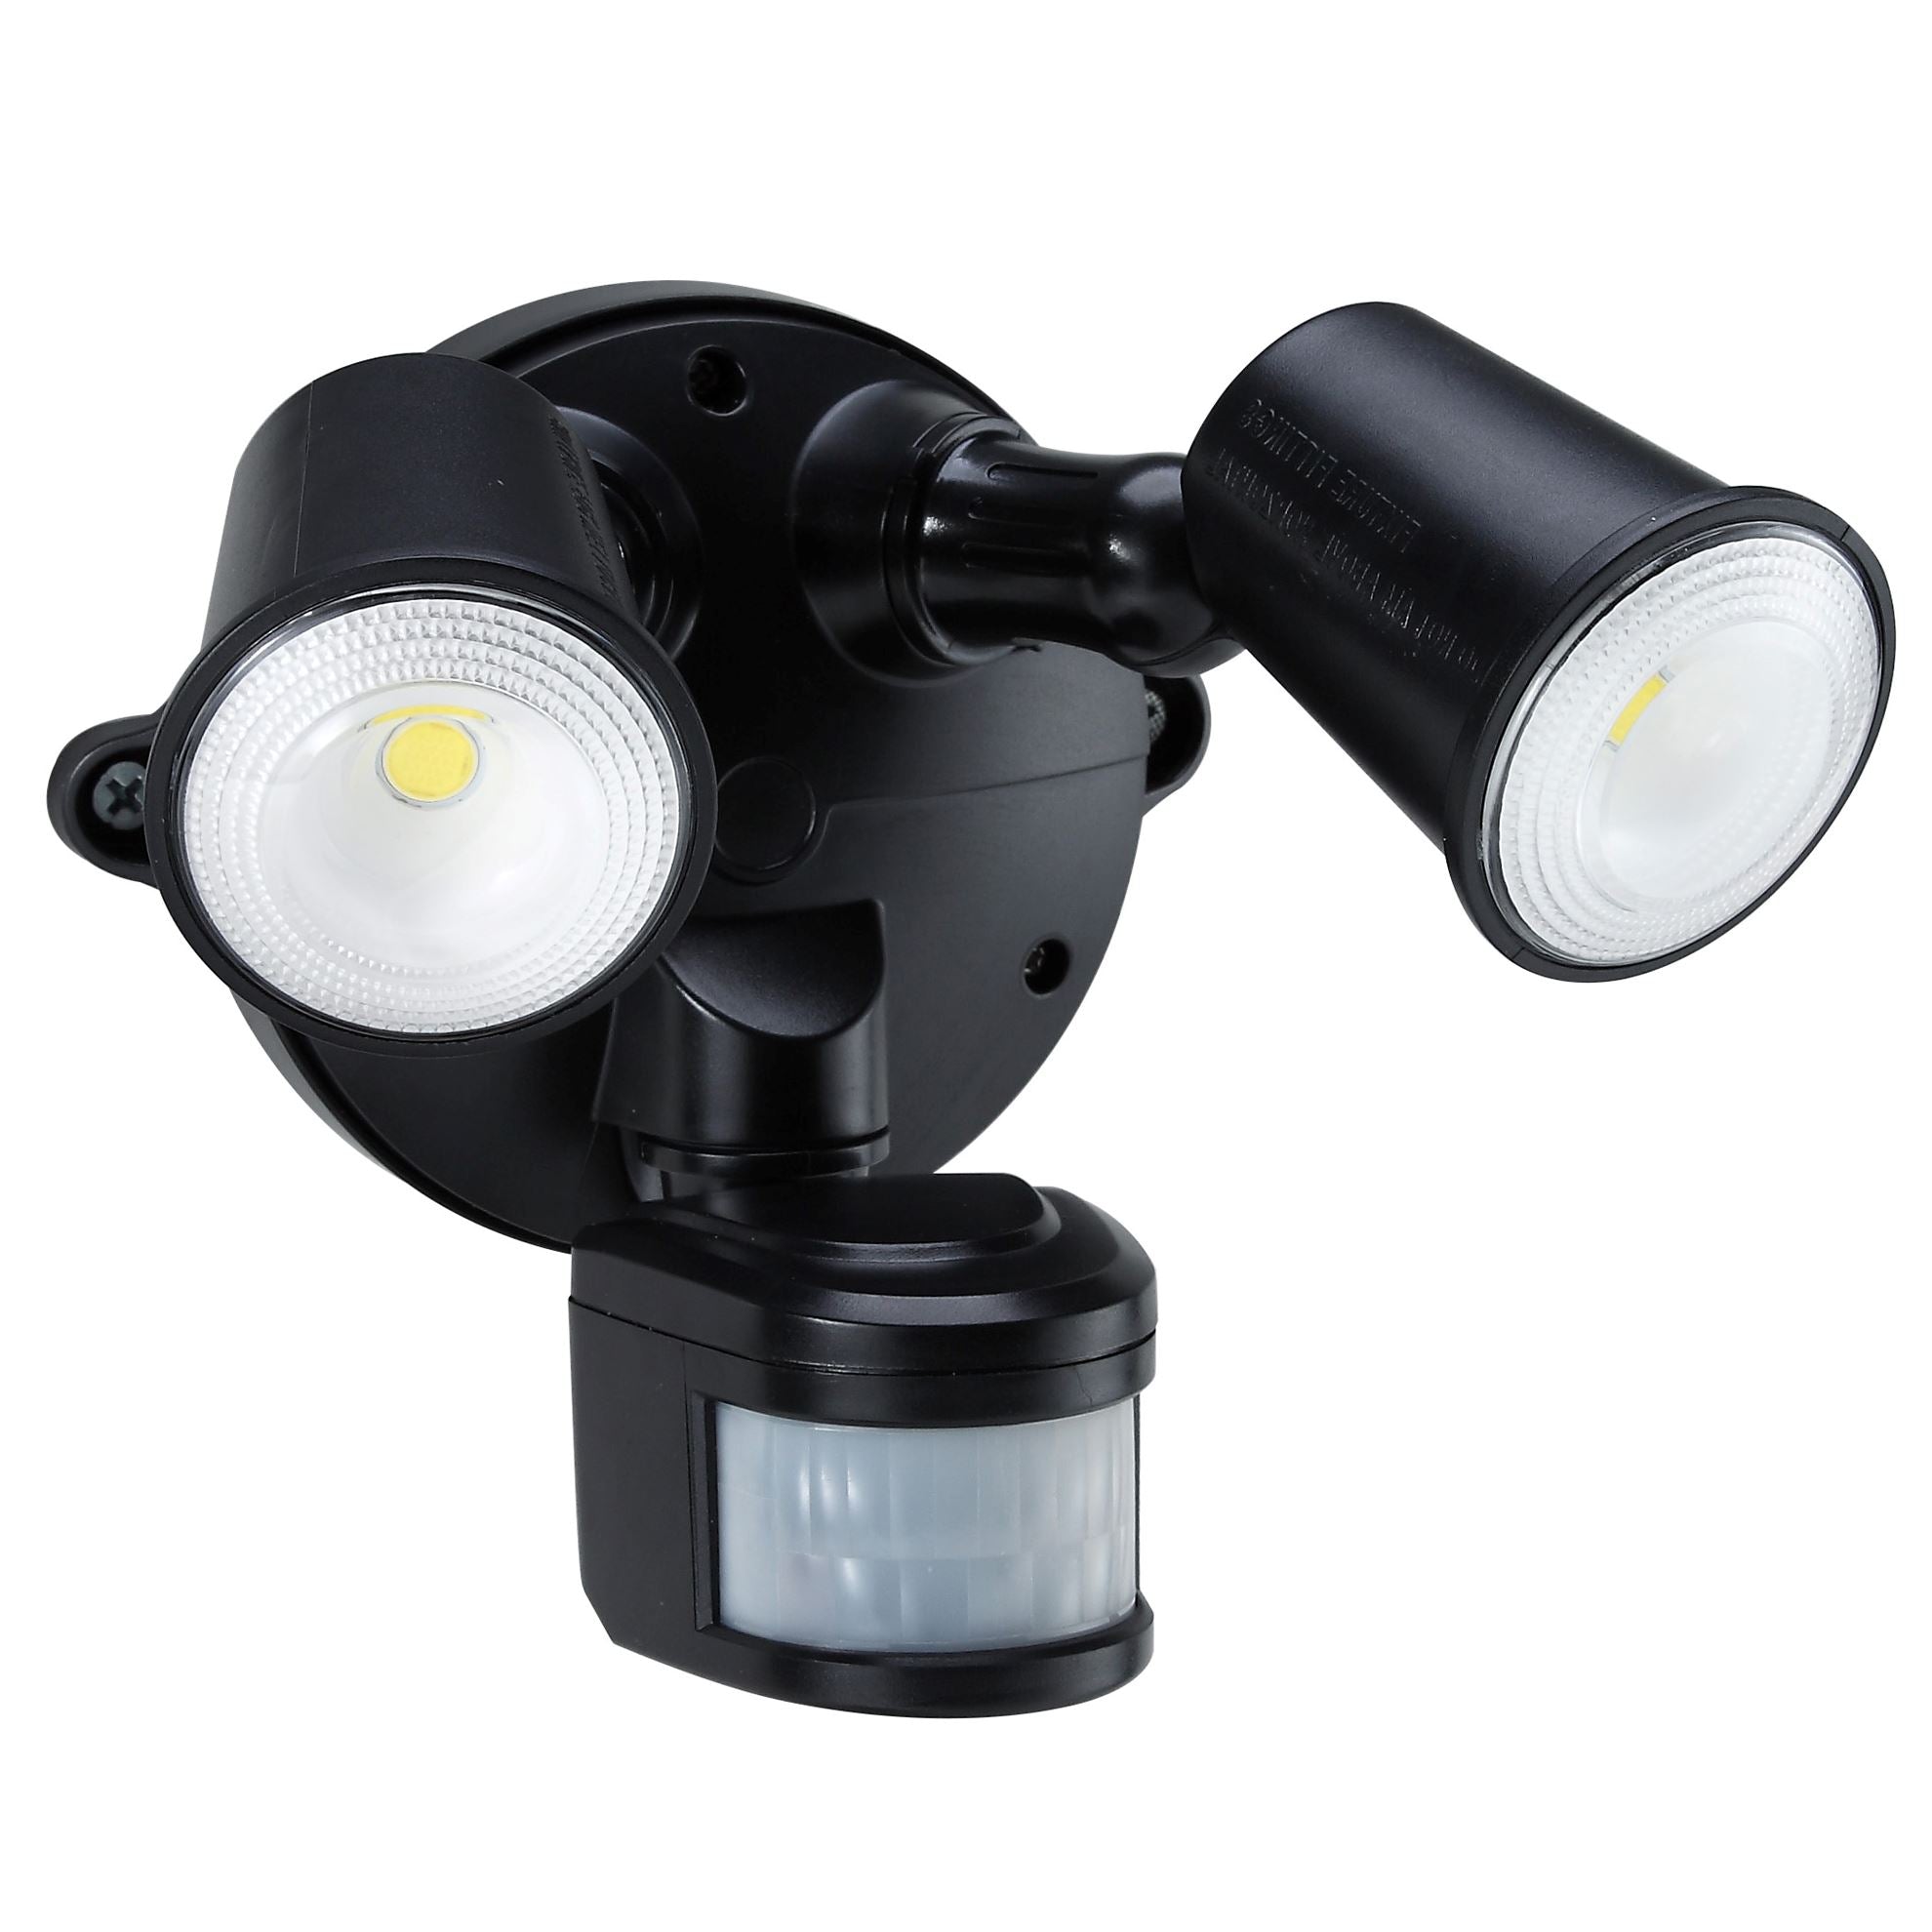 HOUSEWATCH_10W_Twin_LED_Spotlight_with_Motion_Sensor._IP54._Passive_IR._9m_(Side)_and_12m_(Front)_Detection_Range._Detection_Angle_140_Degree._Includes_Timing_&_Lux_Adjustments._Black_Colour.